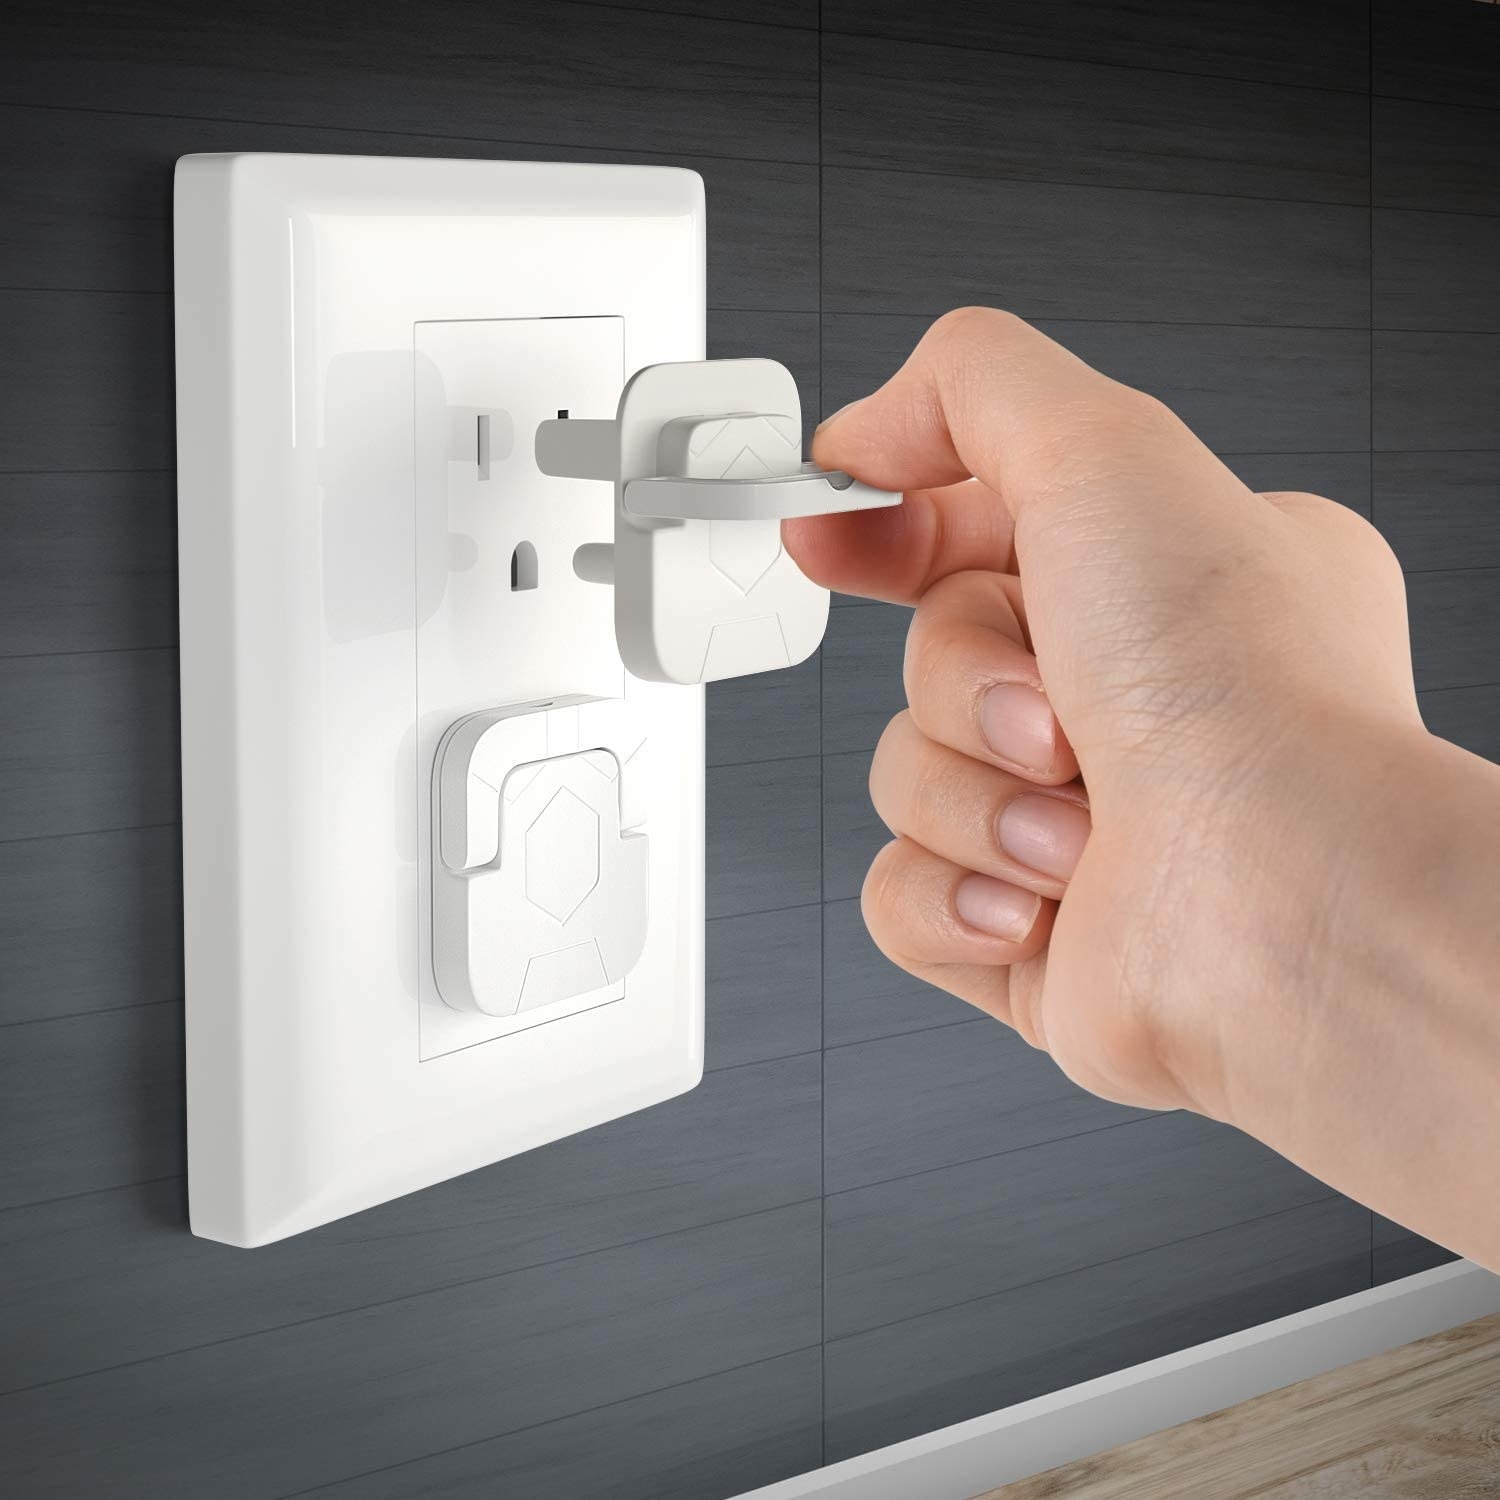 A person putting an outlet cover into a socket